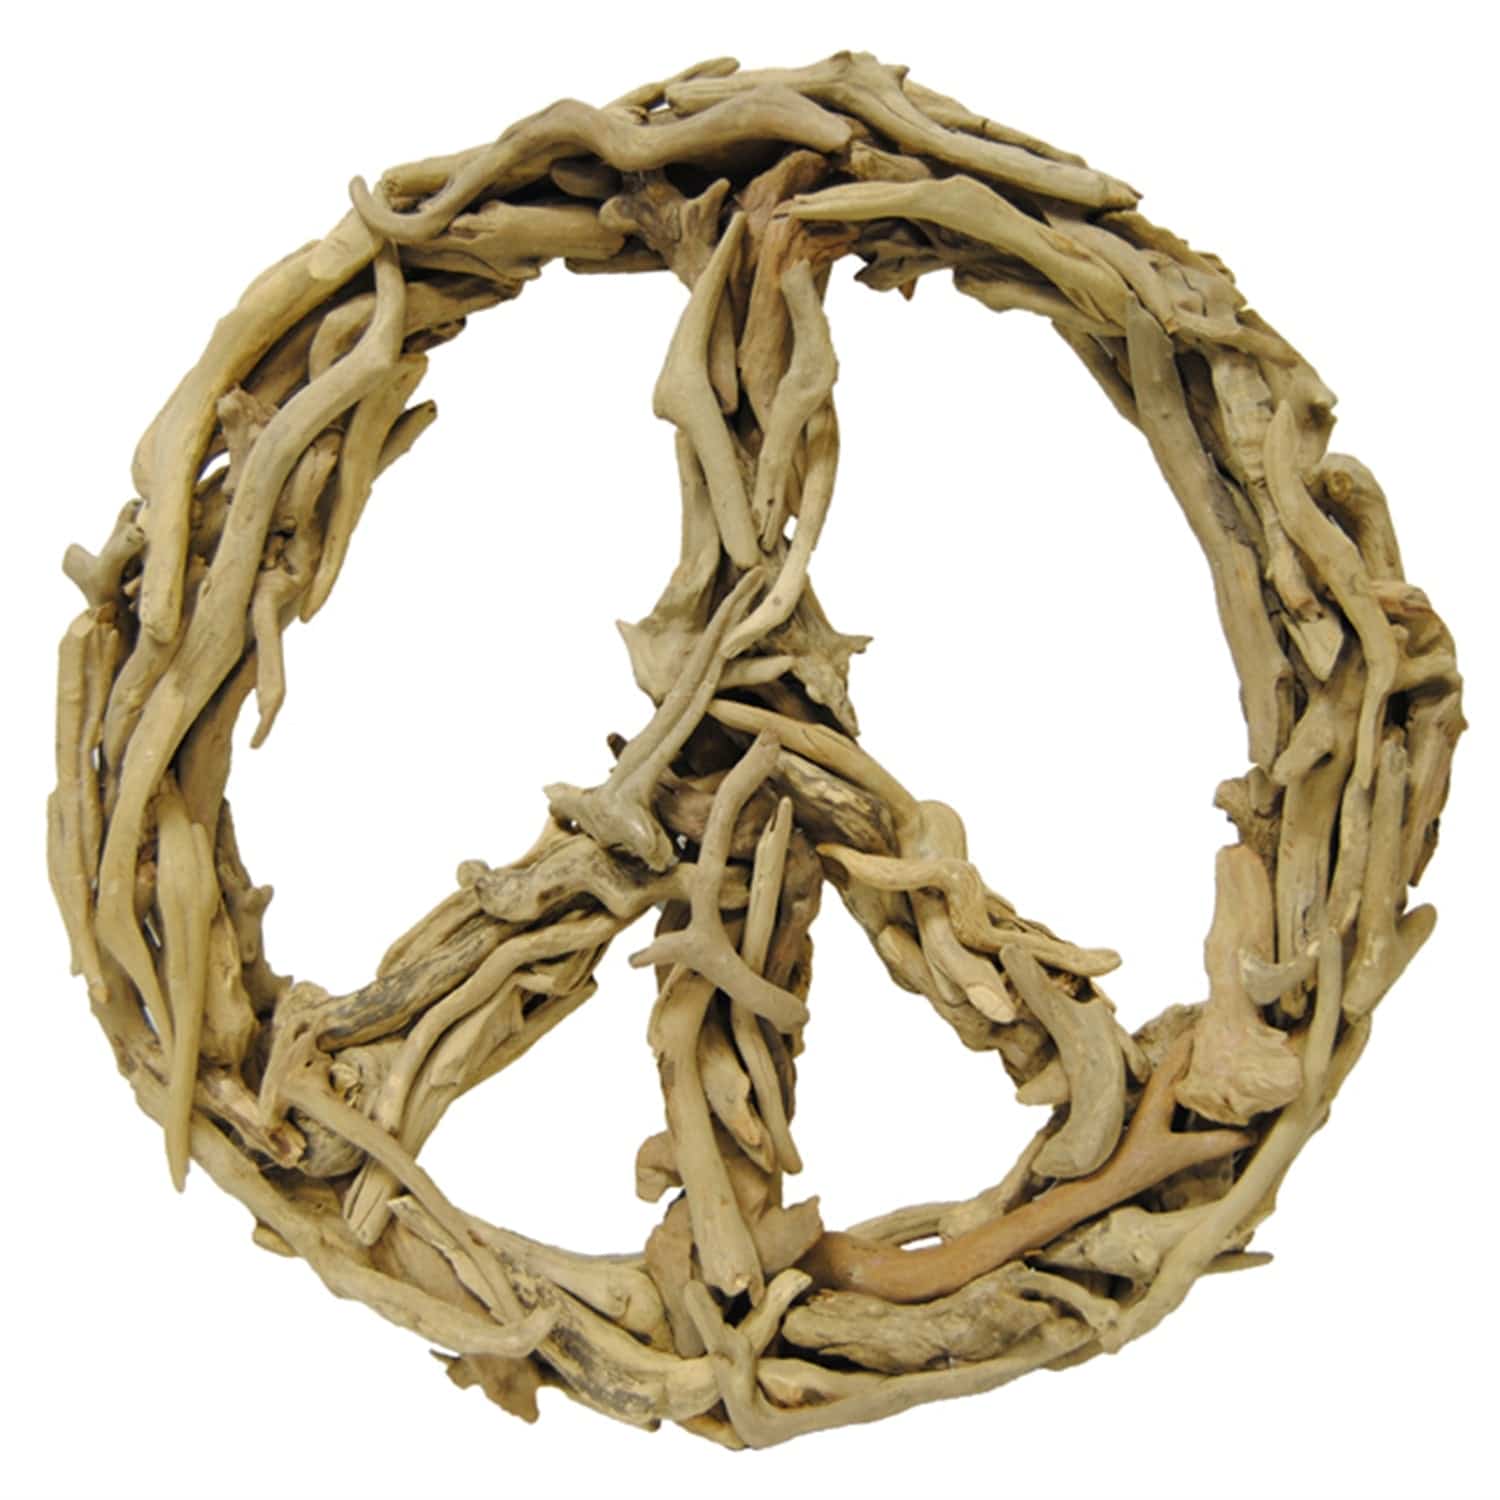 Large Driftwood Peace Sign - Twinkle Twinkle Little One